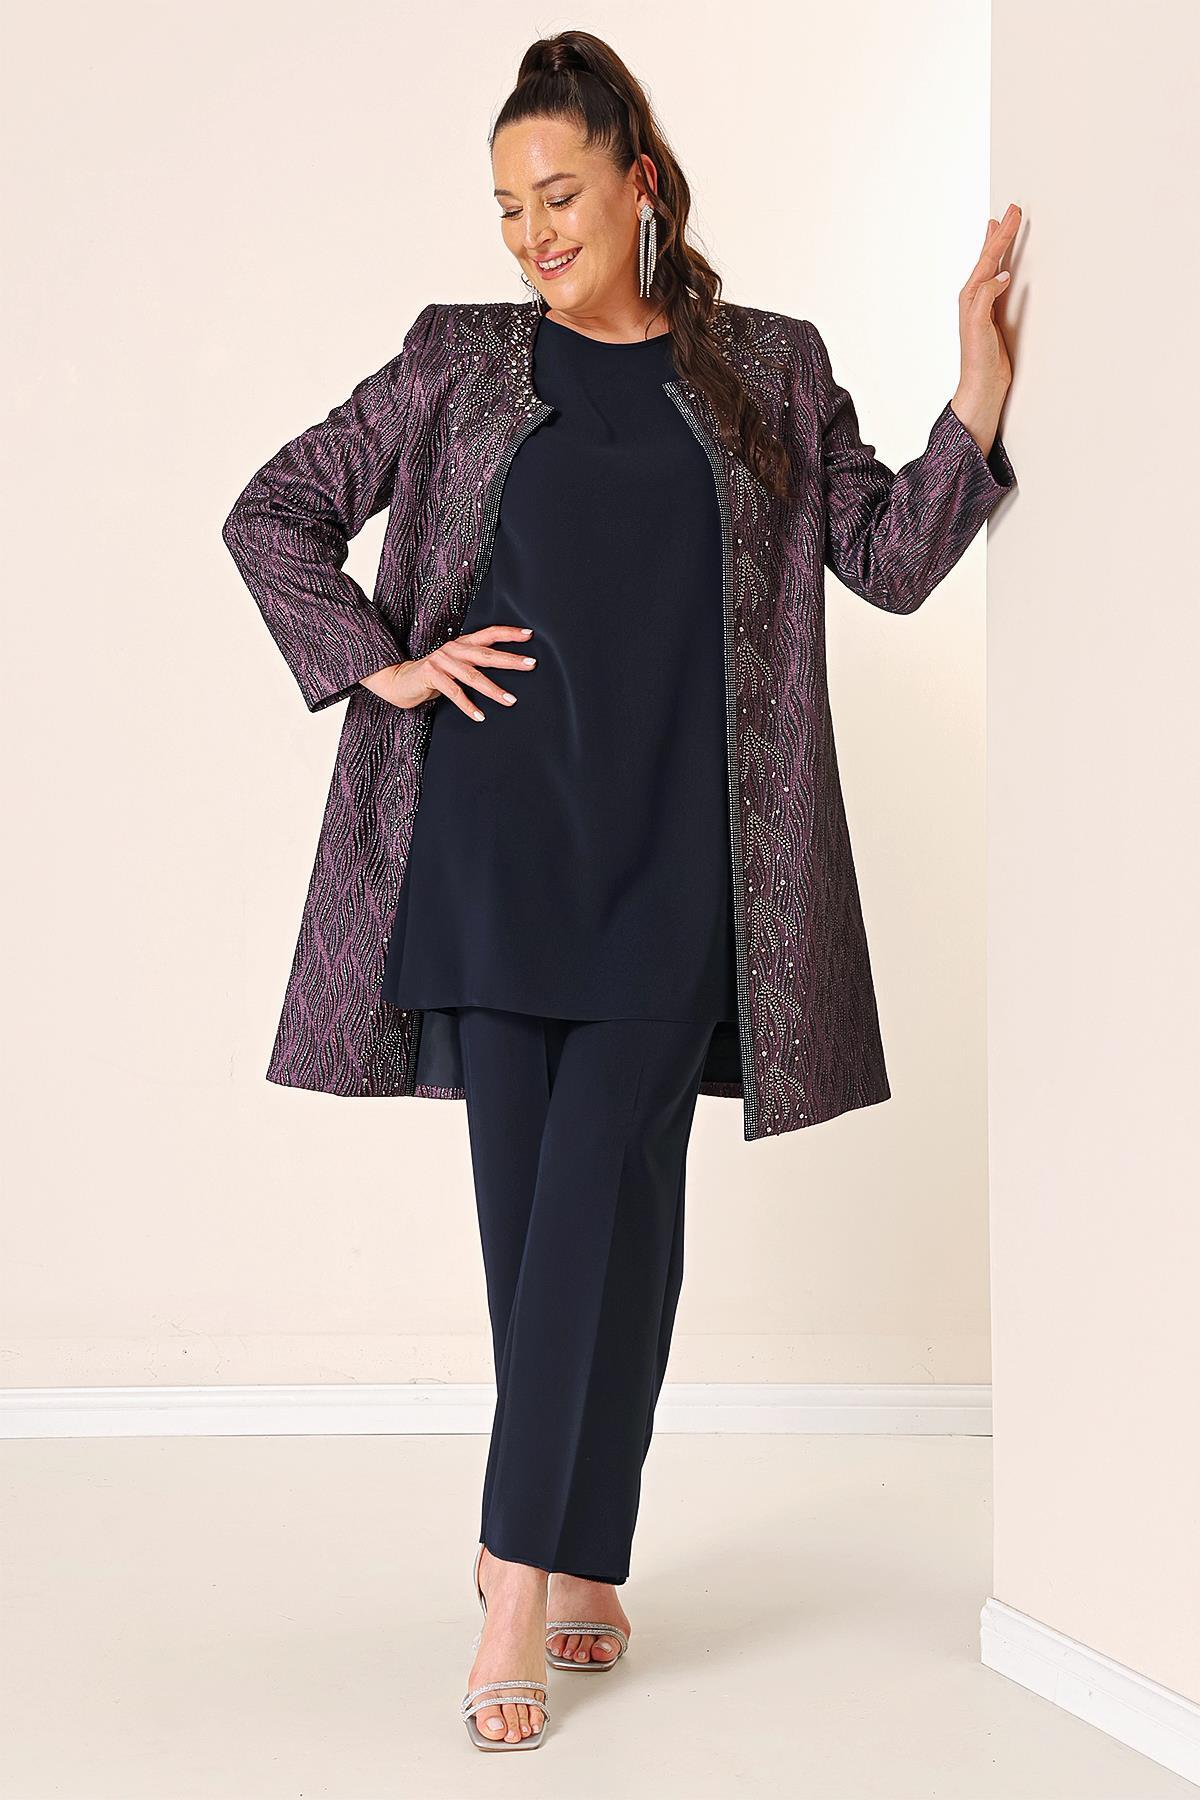 By Saygı Plus Size 3 Set Inner Sleeveless Blouse Bead Detailed Lined Jacquard Long Jacket Trousers